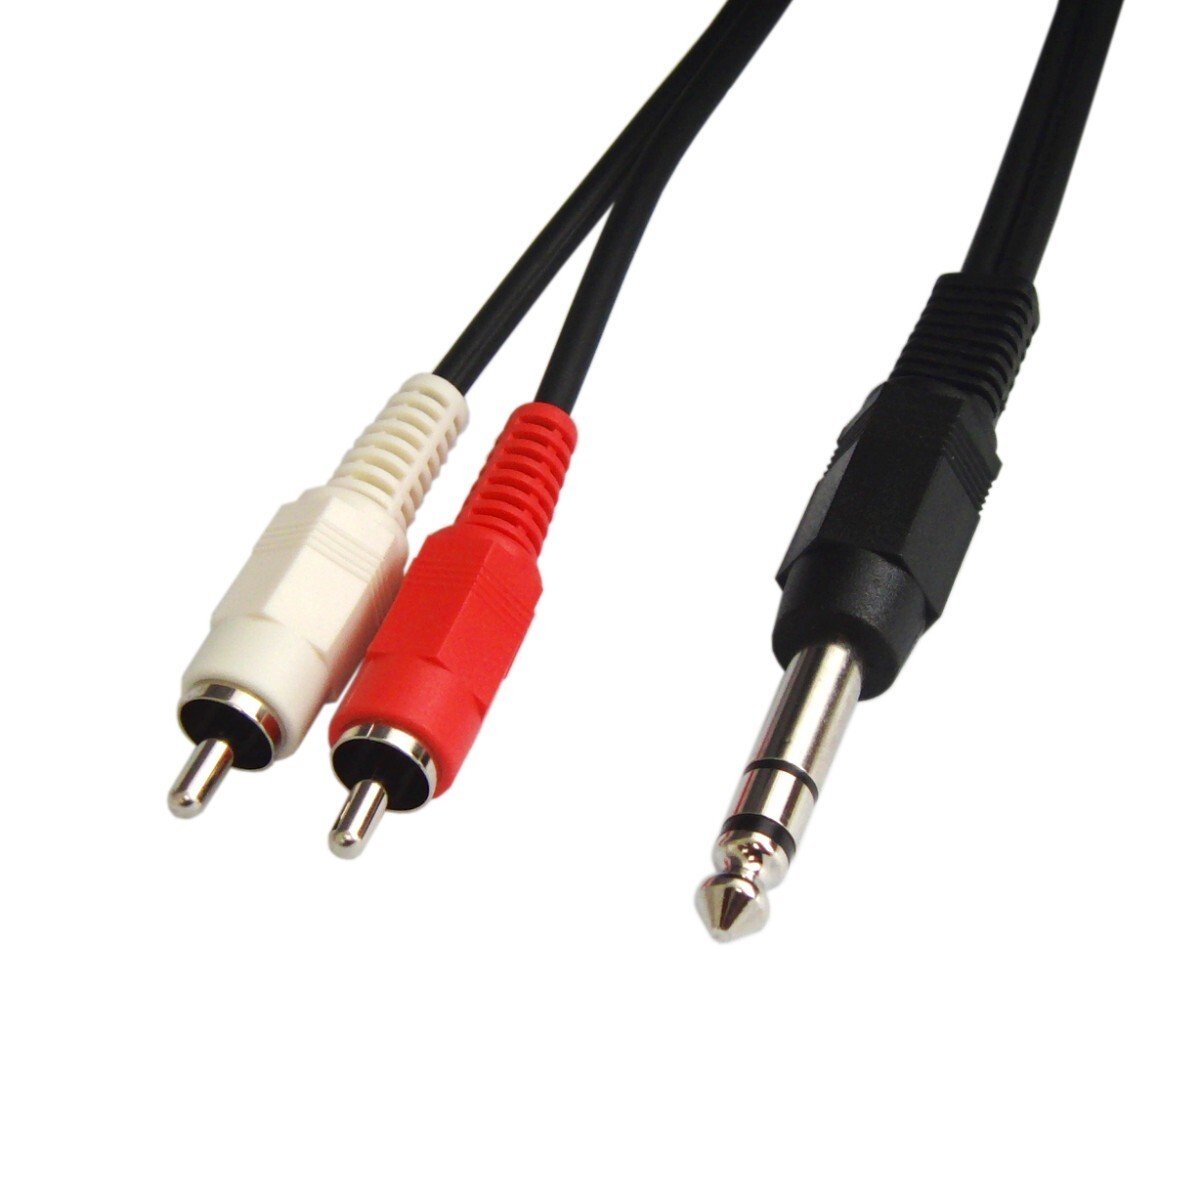  audio conversion cable RCA / pin plug ×2( red. white ) - 6.3mm stereo standard plug 10m VM-RRS-10m